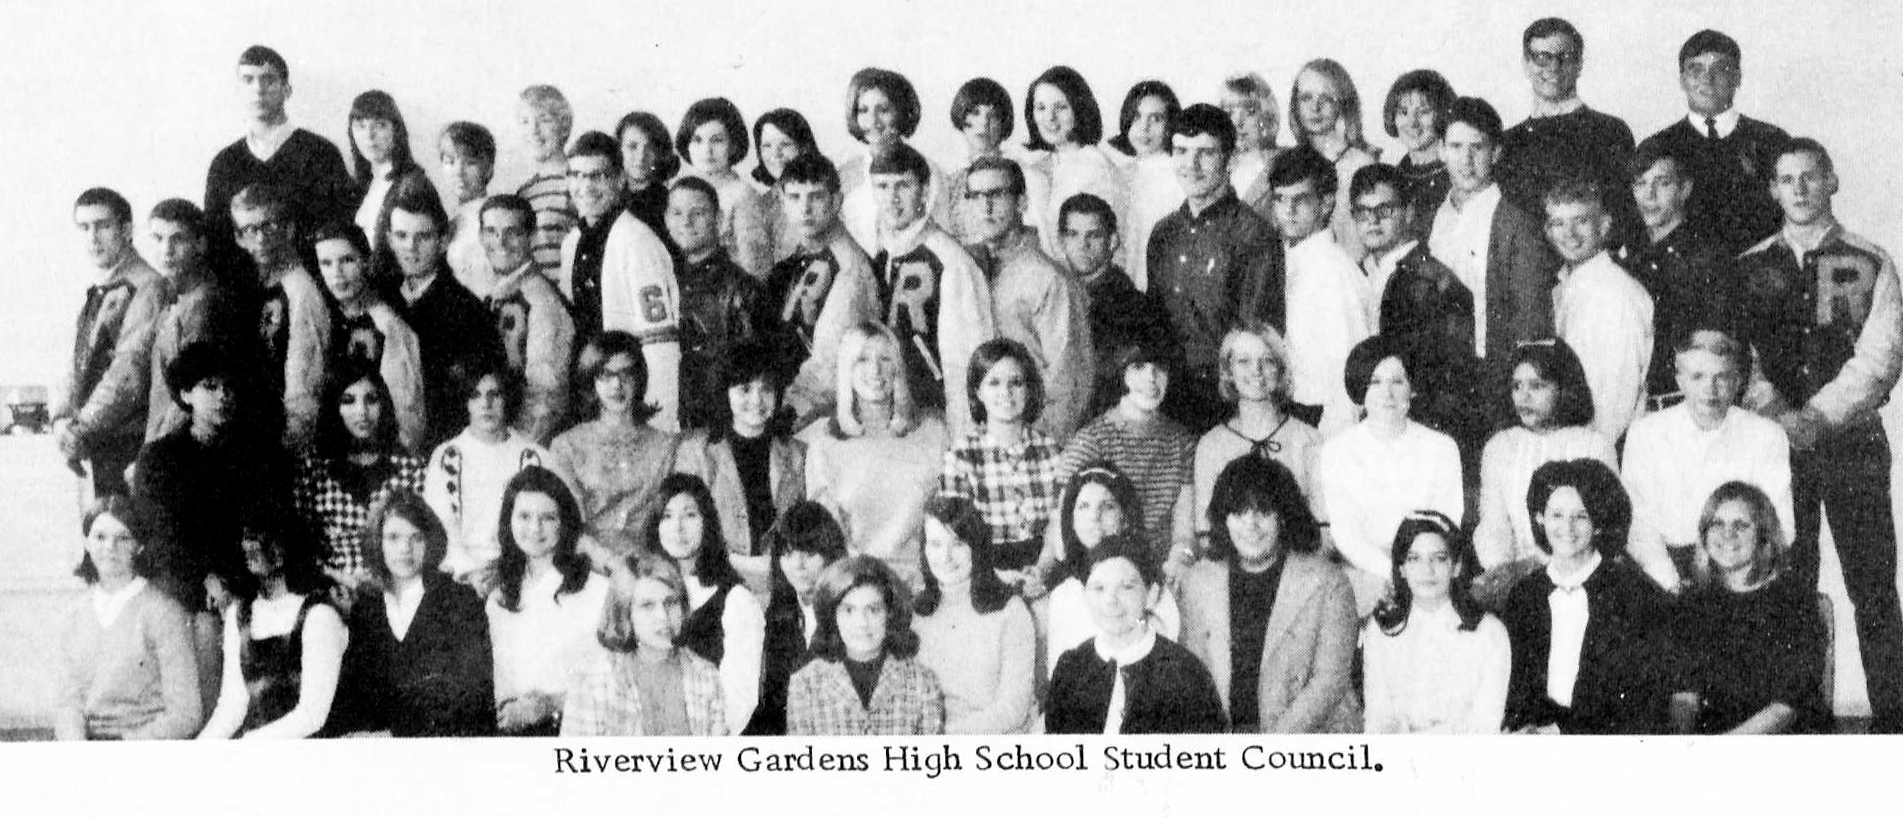 RGHS Student Council: 1967-68 School Year. PROM MAGAZINE JUNE 1968